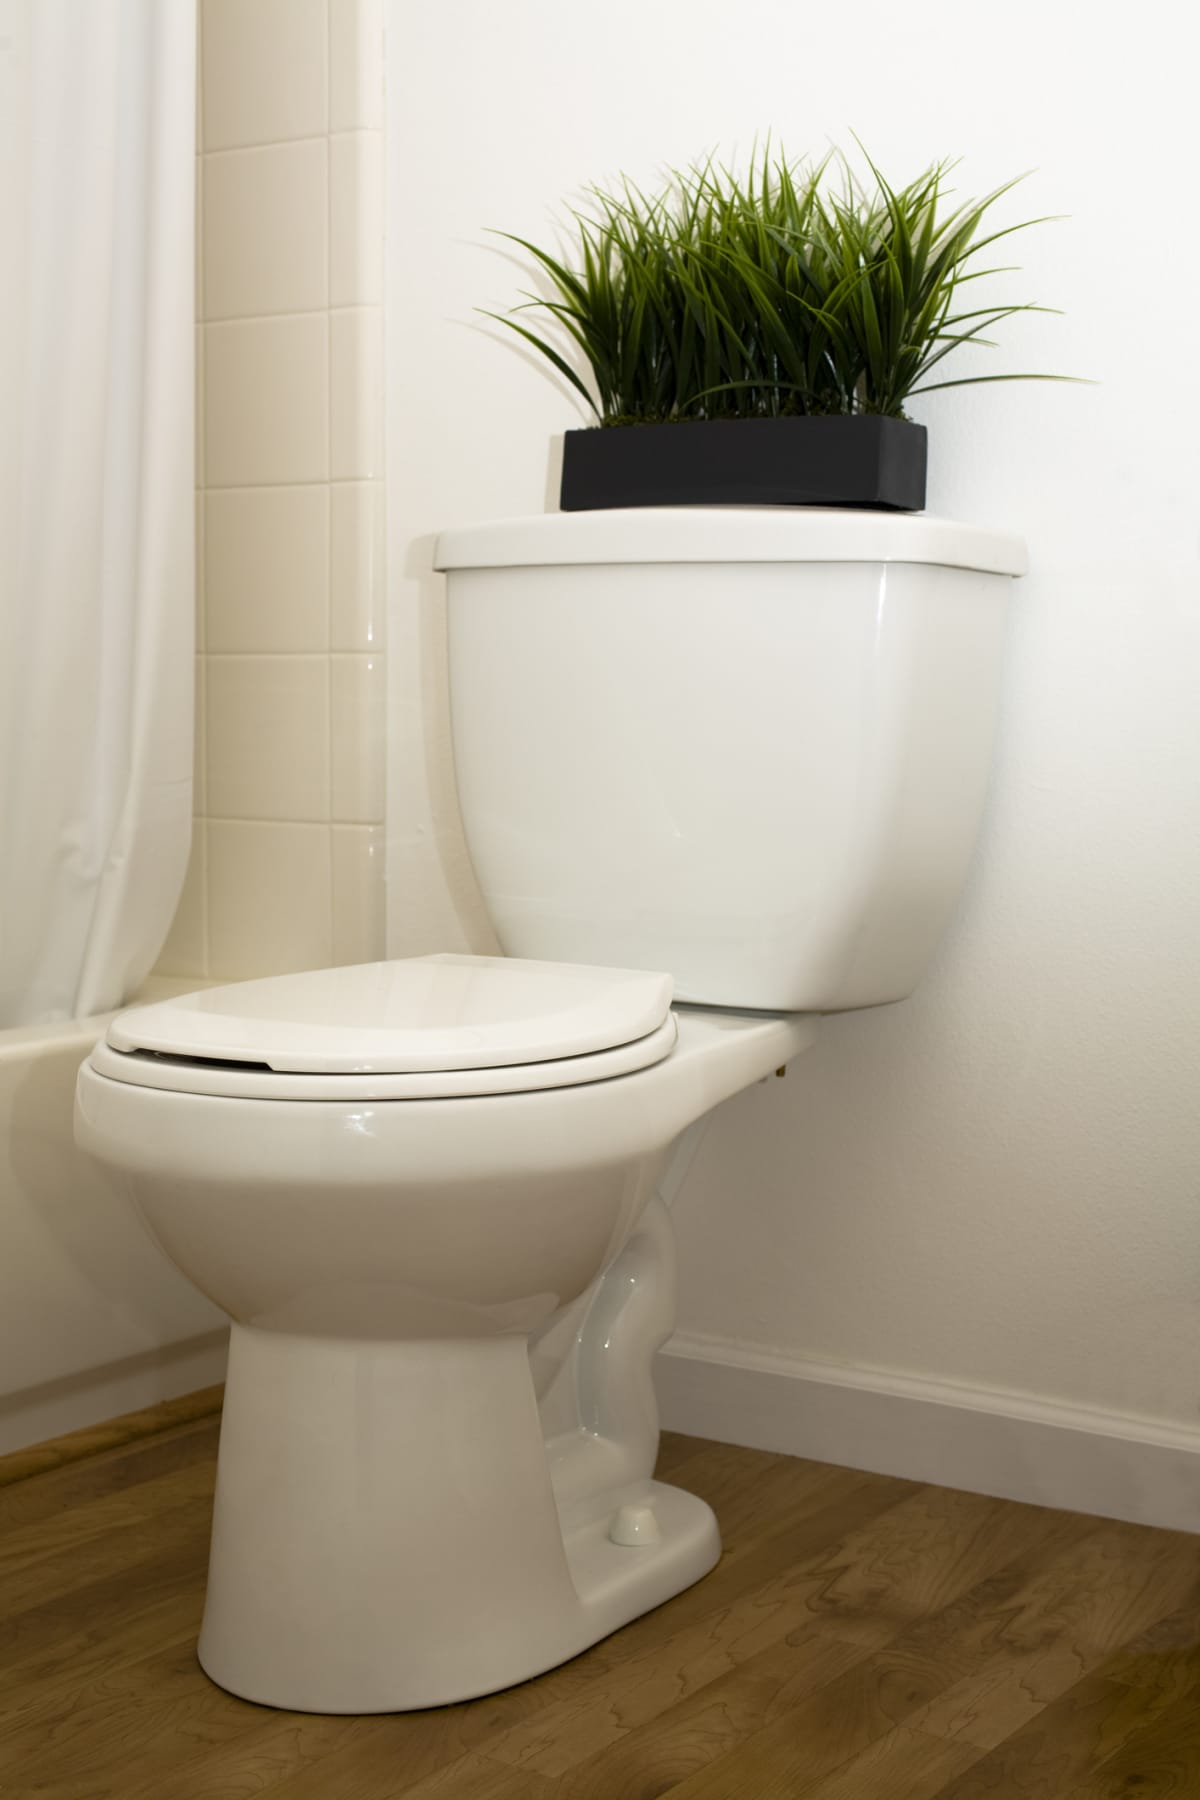 White bathroom fixtures with green plant on tank